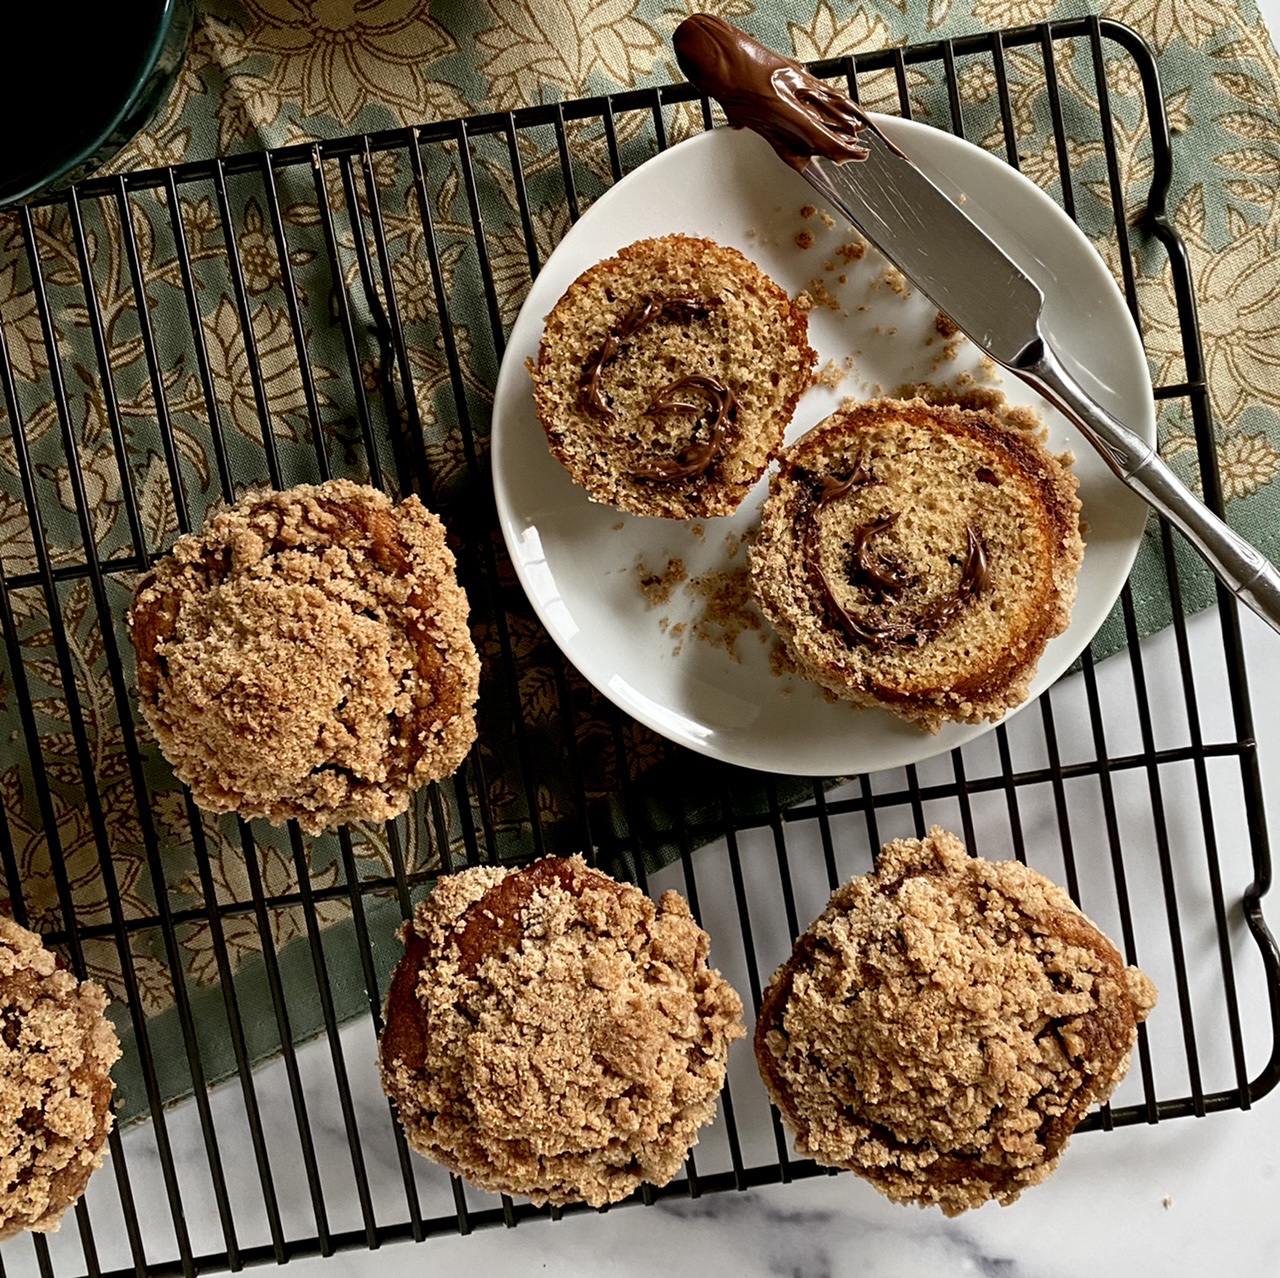 Coffeecake Nutella muffin on a white plate with a knife surrounded by muffins on a wire rack